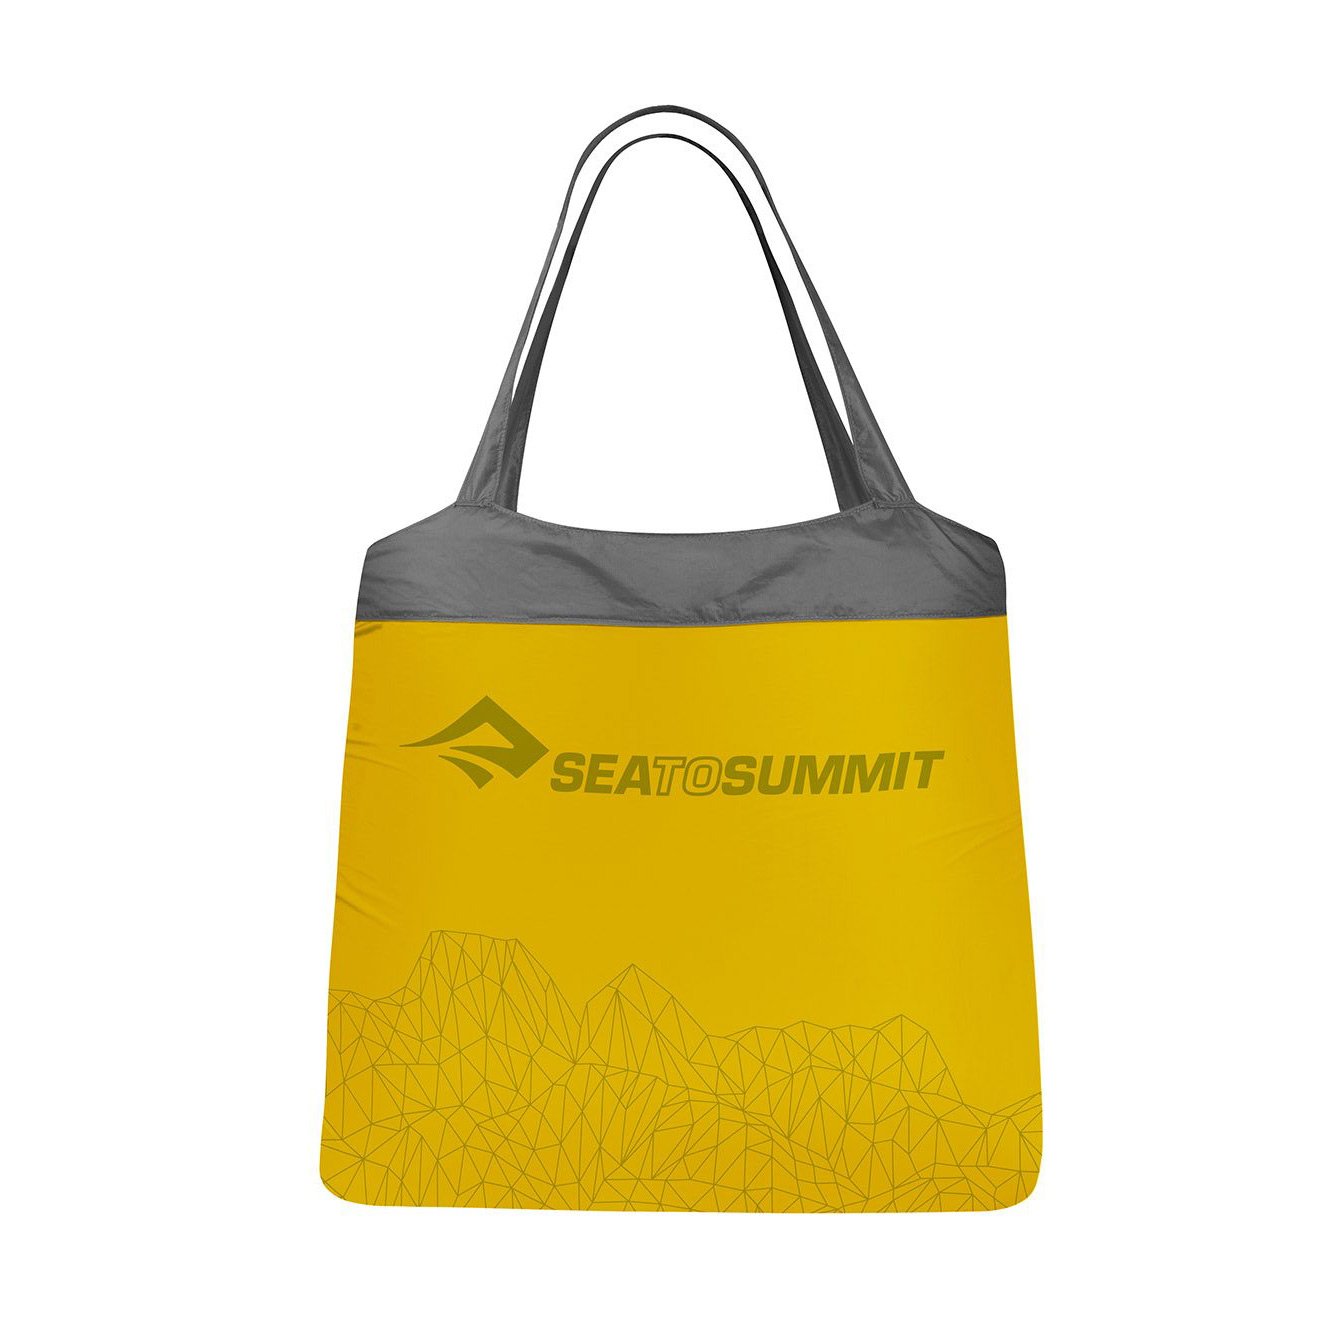 Sea To Summit Ultra Sil Nano 25L Shopping Bag Bags, Packs and Cases Sea To Summit Yellow Tactical Gear Supplier Tactical Distributors Australia